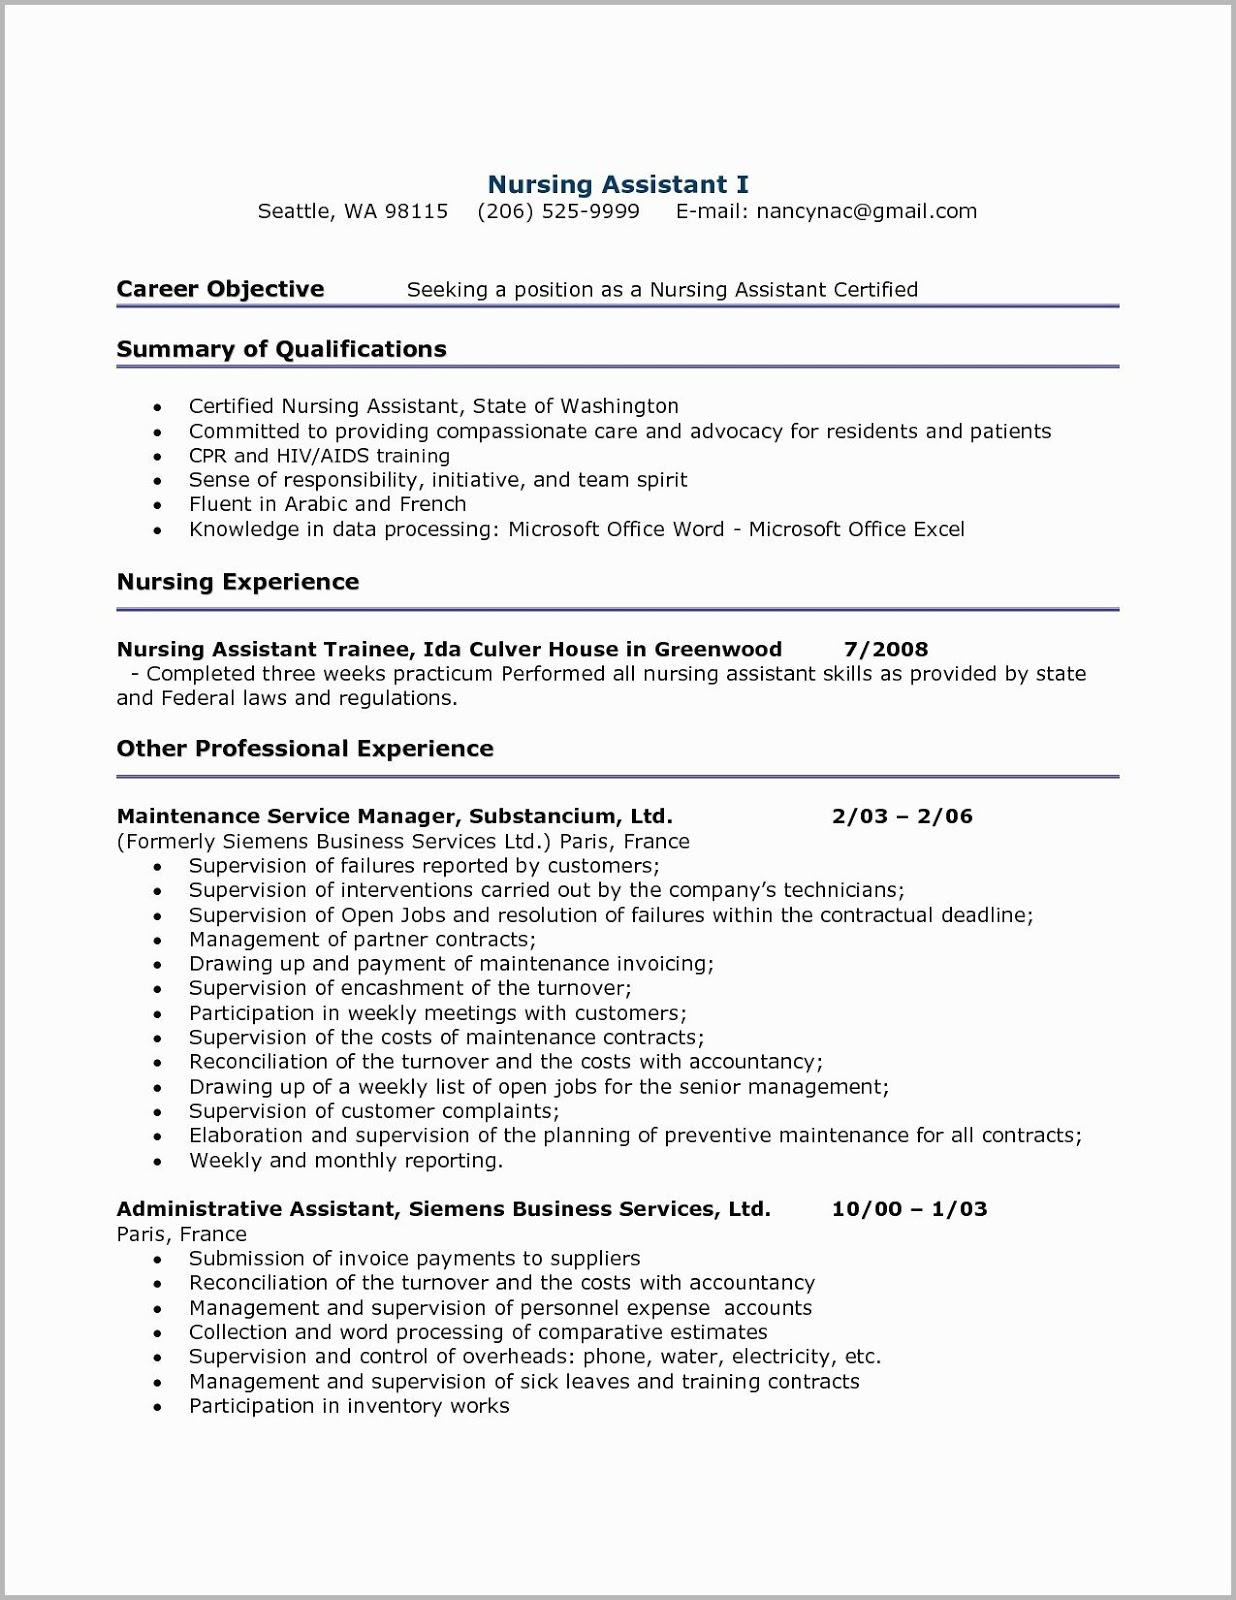 Administrative Assistant Resume, administrative assistant resume summary, administrative assistant resume examples